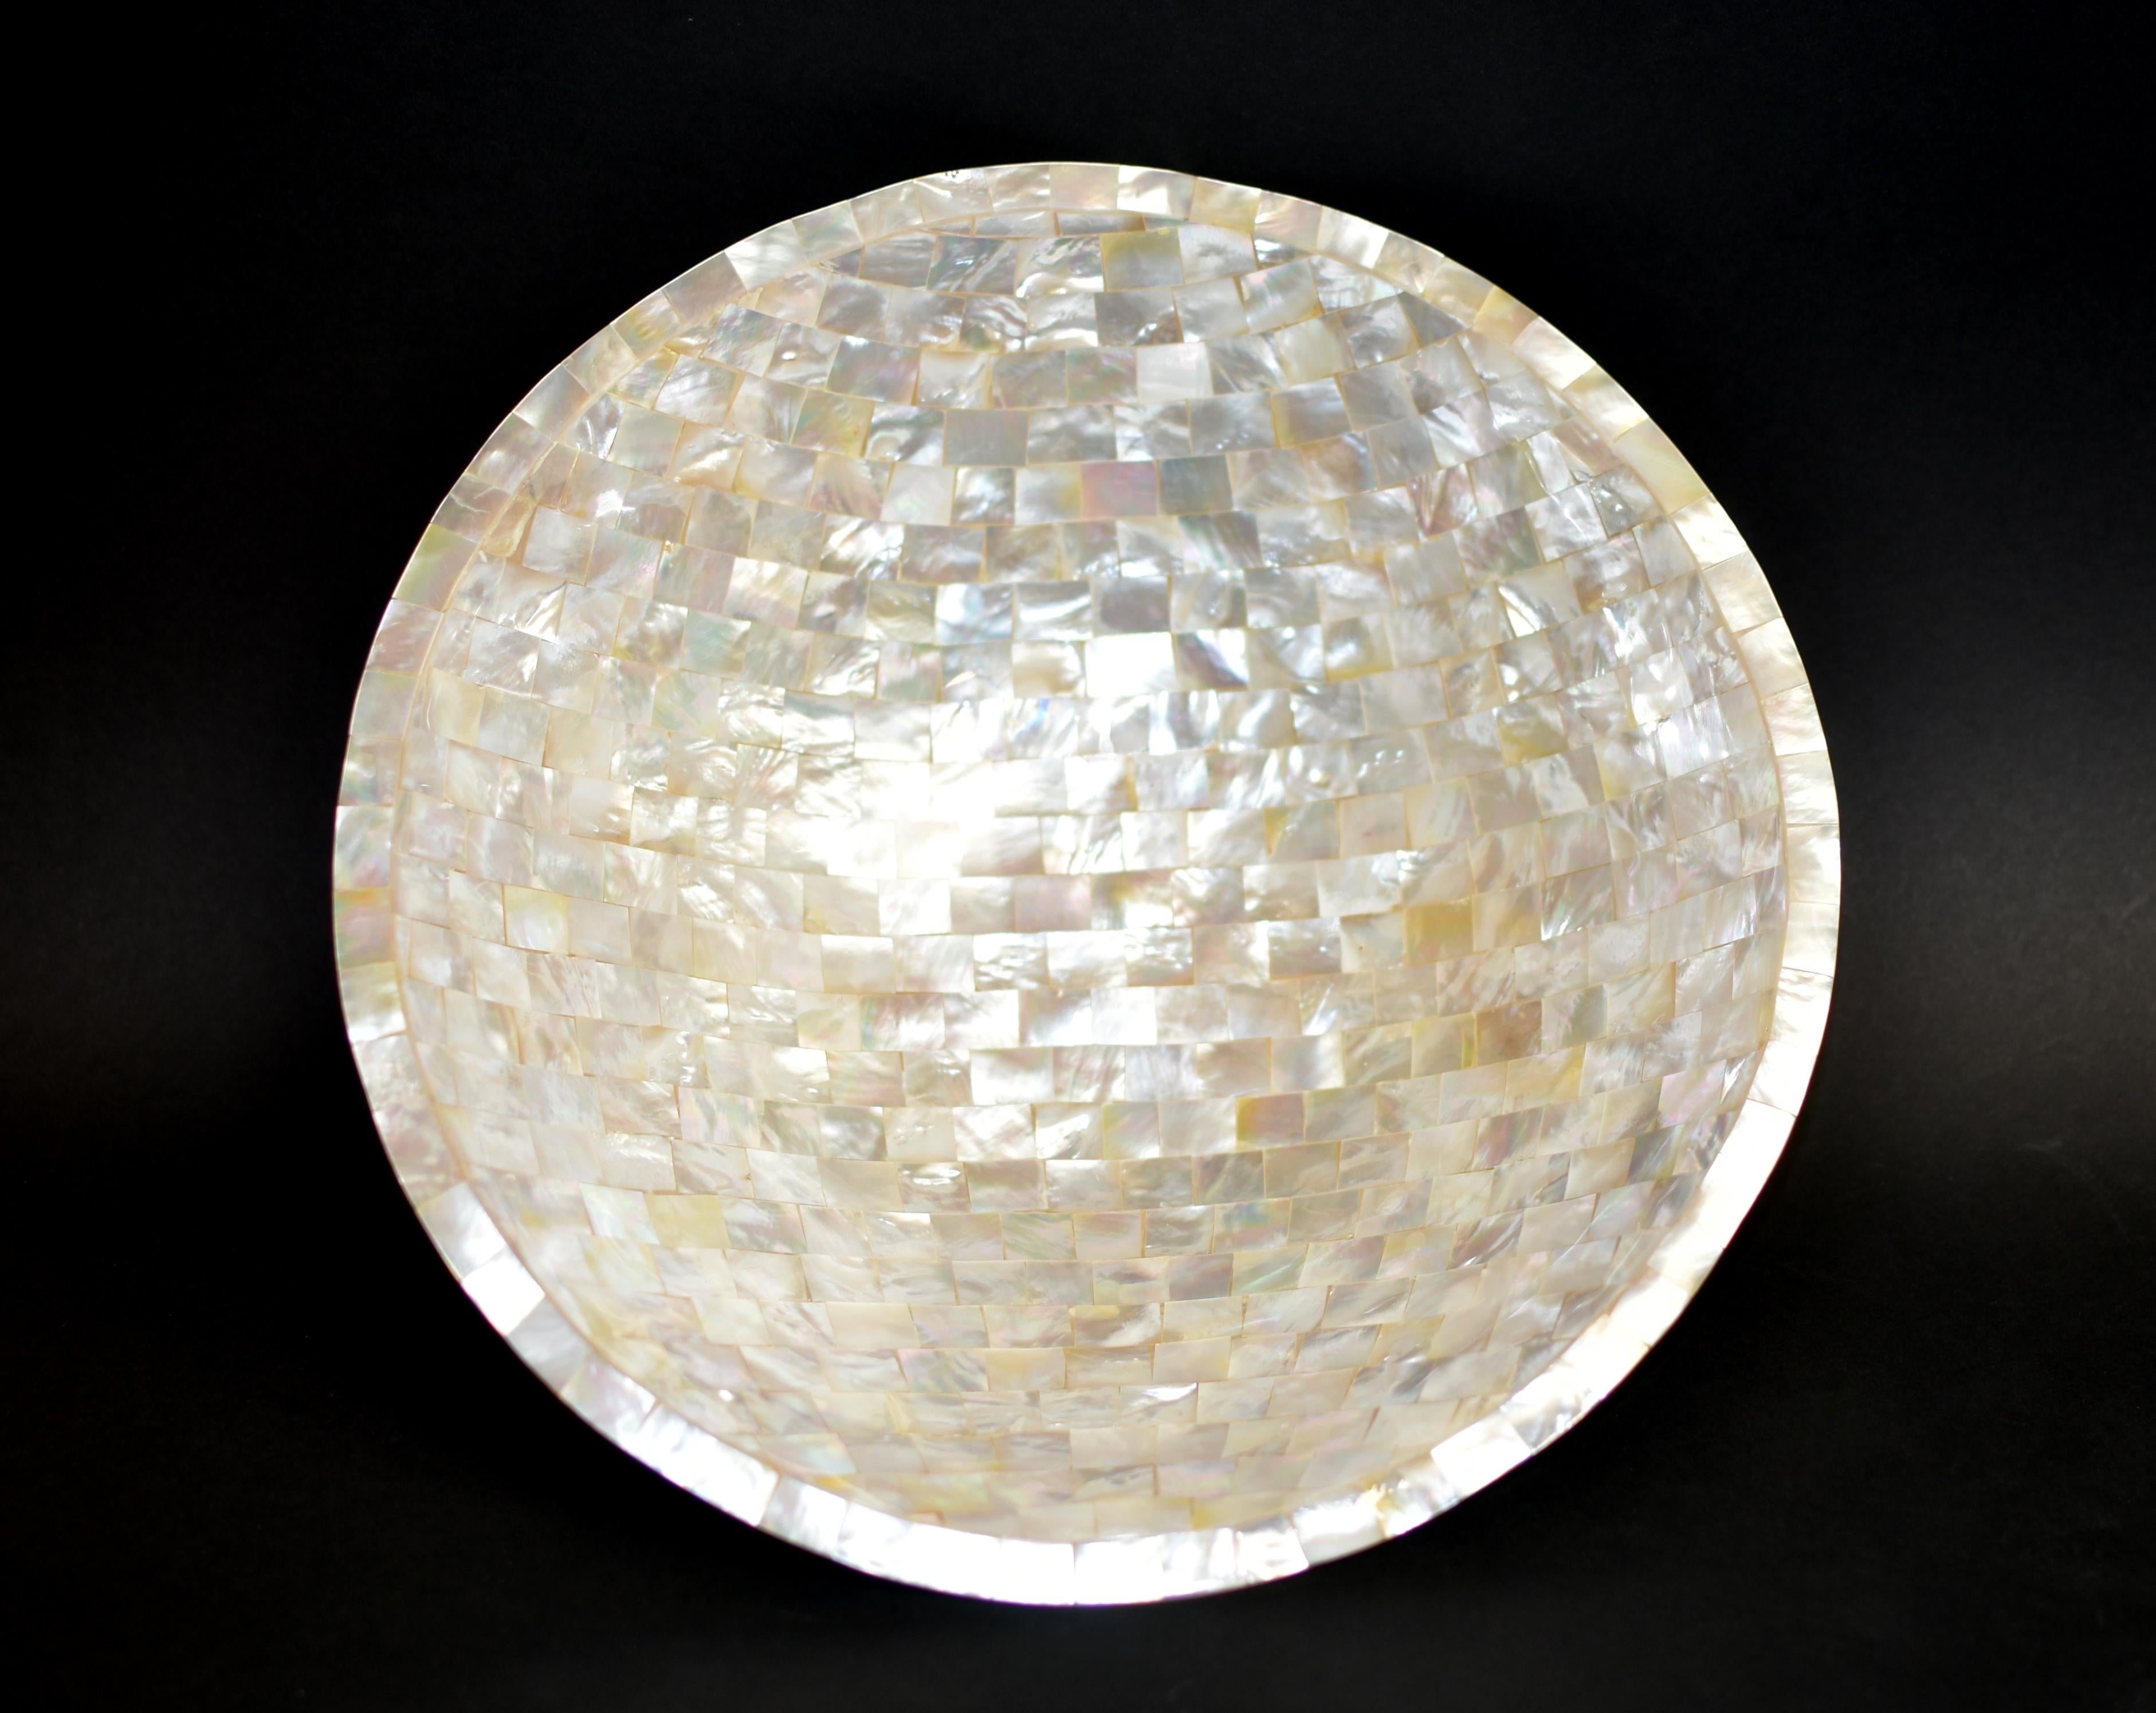 A spectacular mother of pearl bowl, completely hand made by the Indonesian craftsmen. Bowl is meticulously encrusted with mother of pearl and polished to a beautiful, lustrous shine. Perfectly smooth to touch, iridescent inside out and all around.